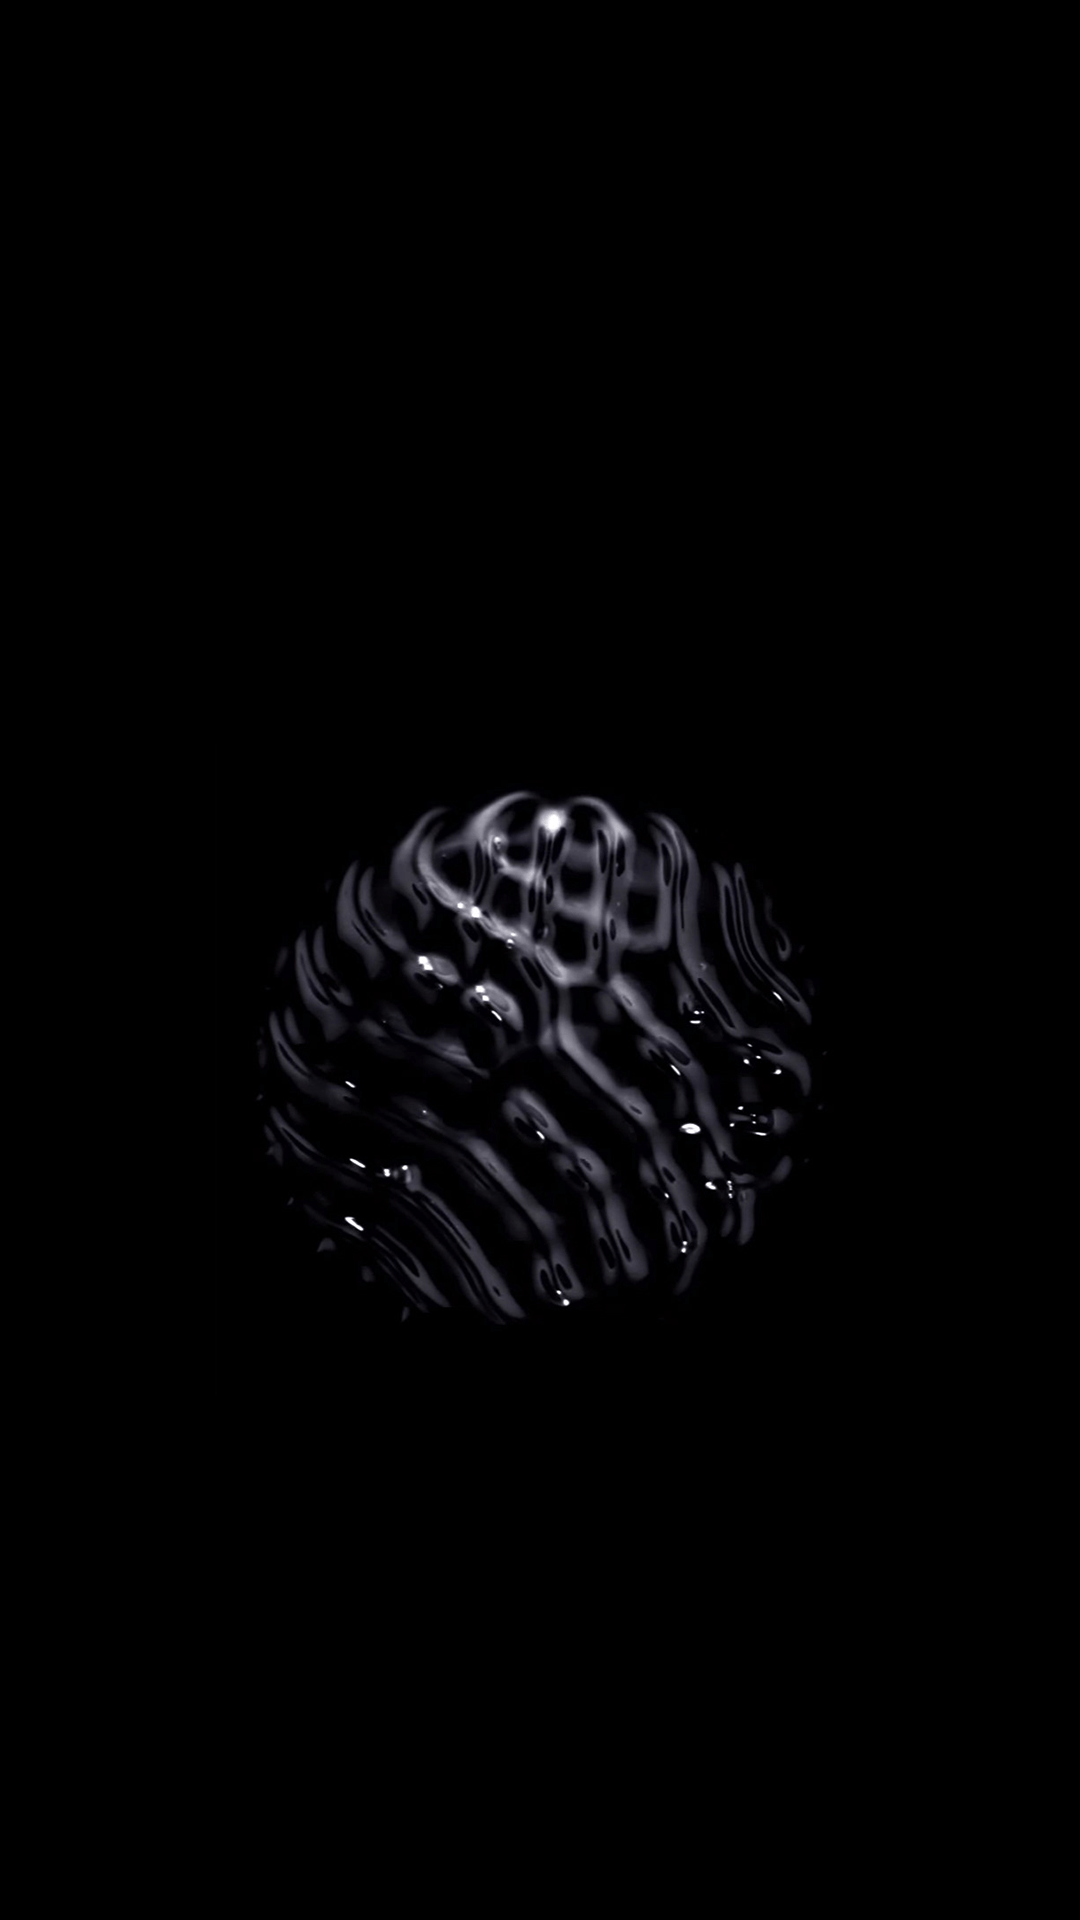 Dark wallpaper to compliment your new iPhone 7